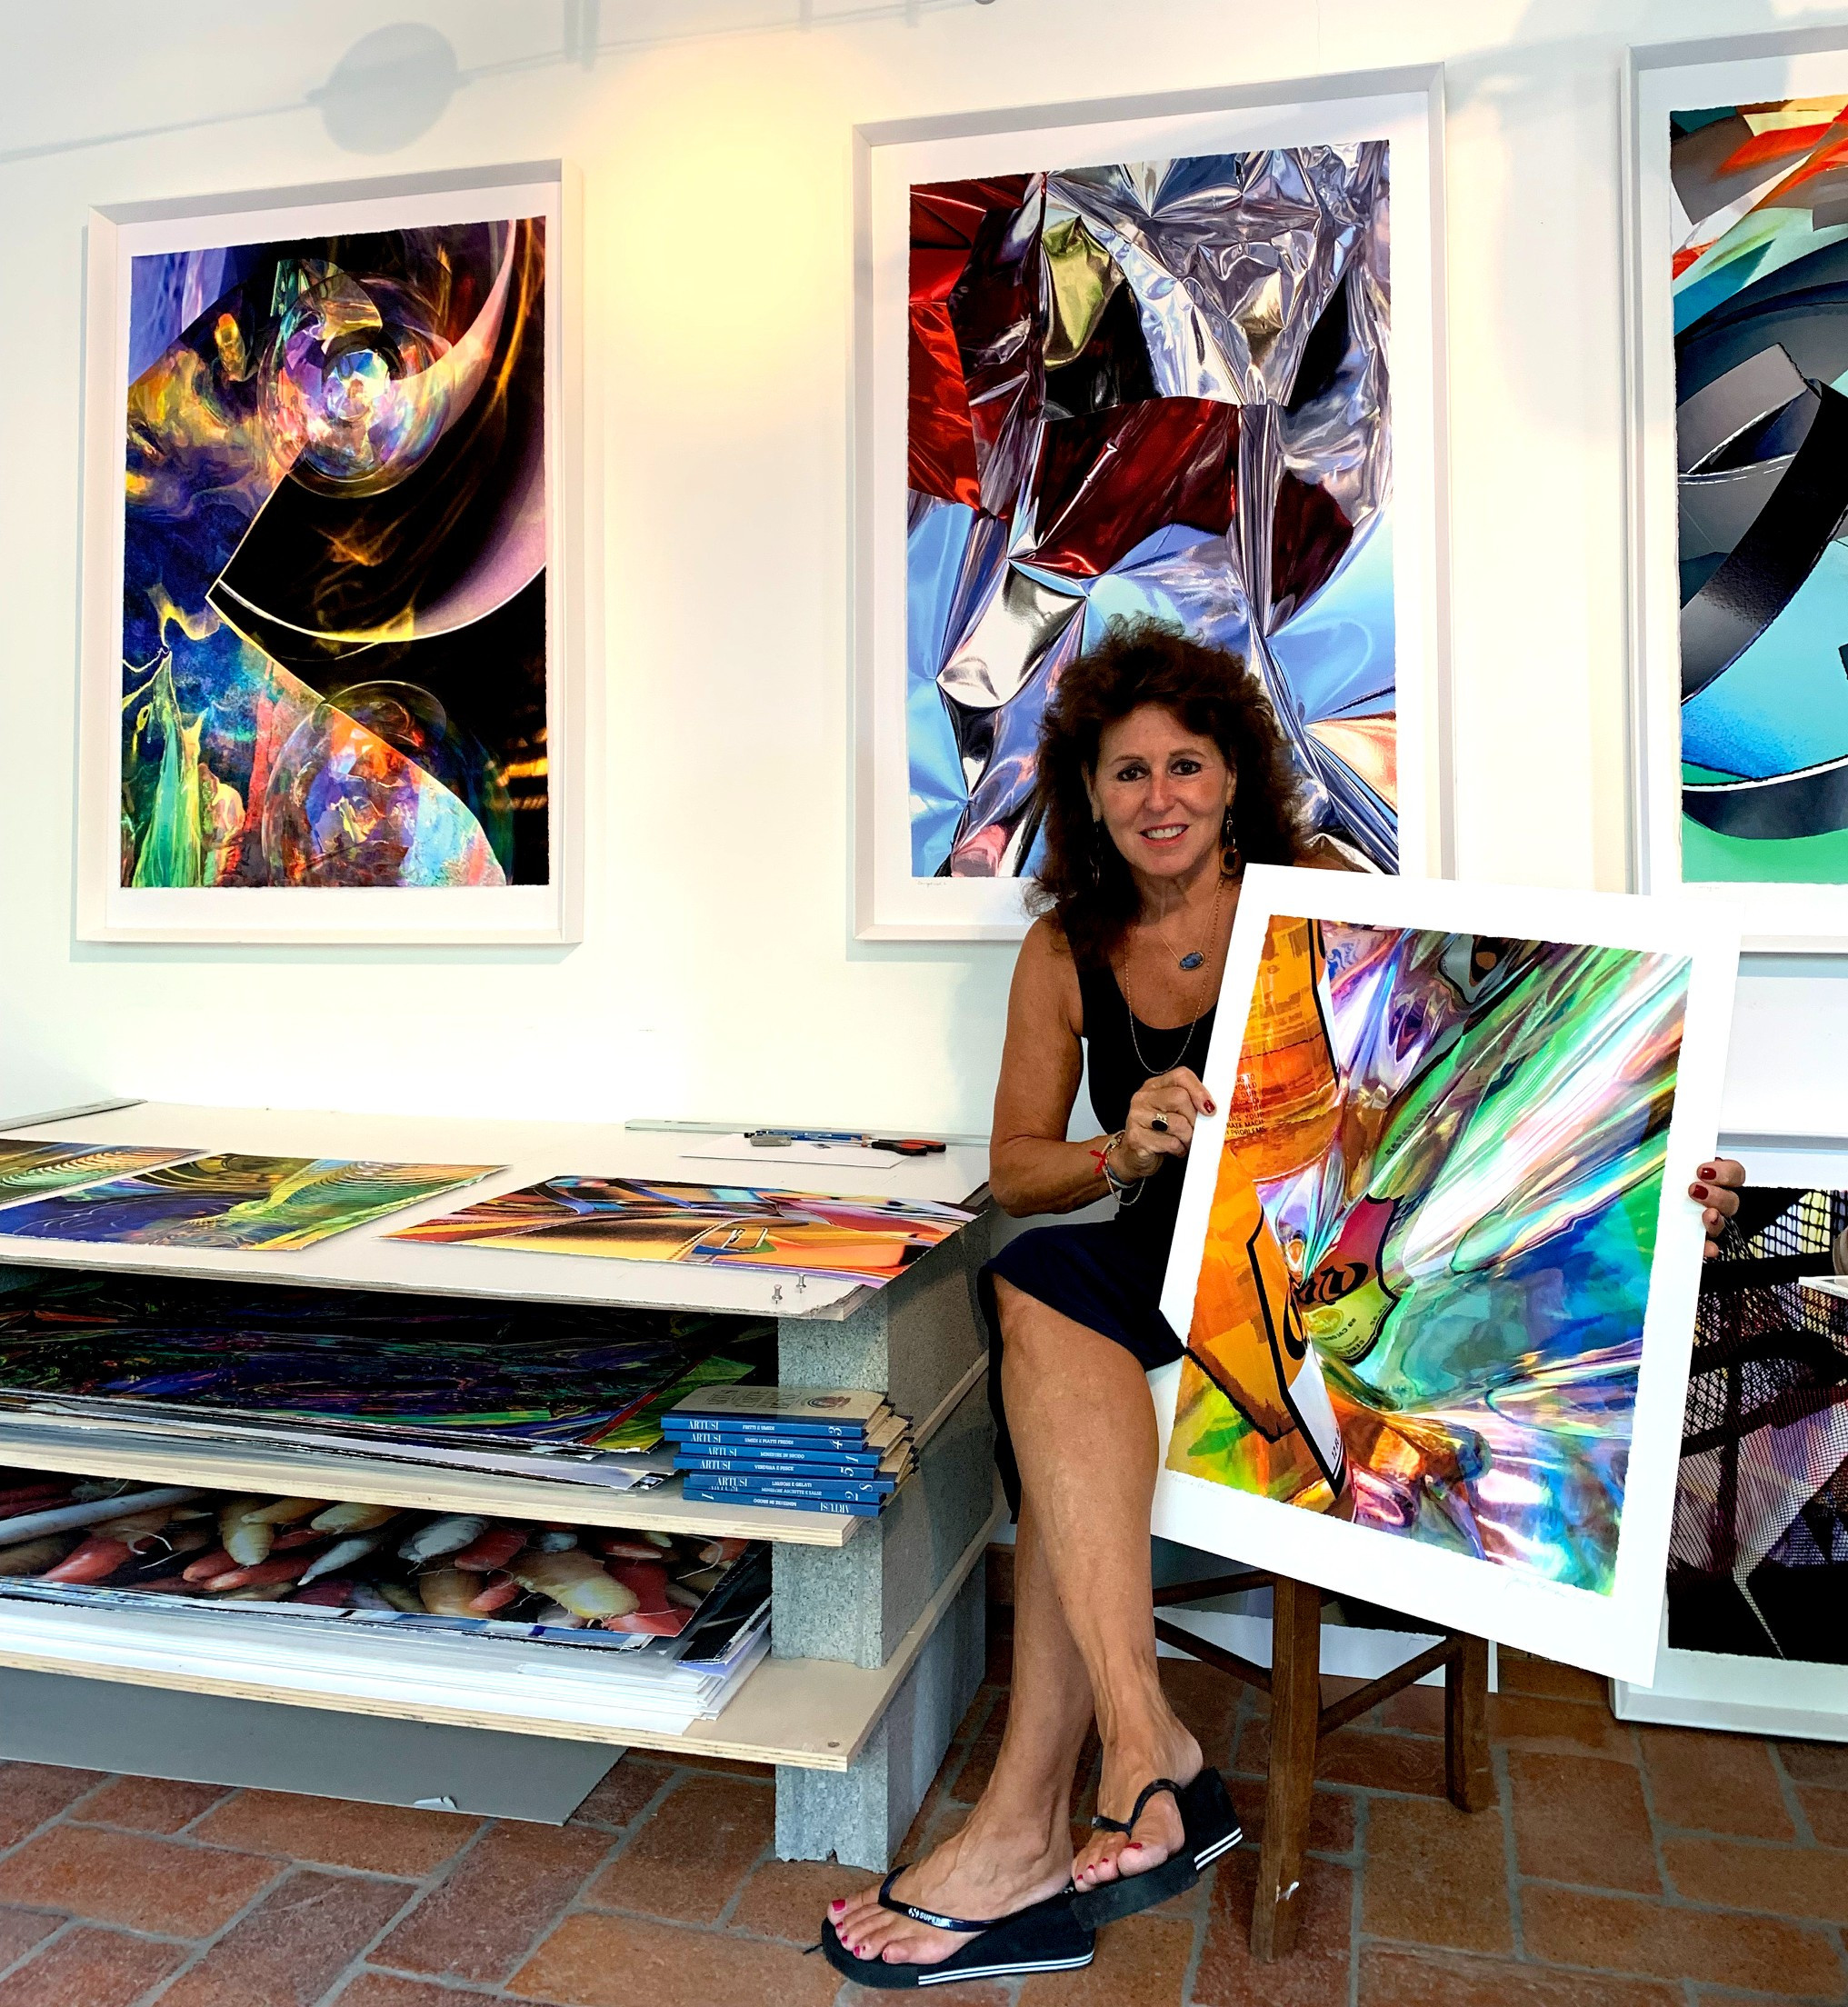 seated woman holding colourful artwork